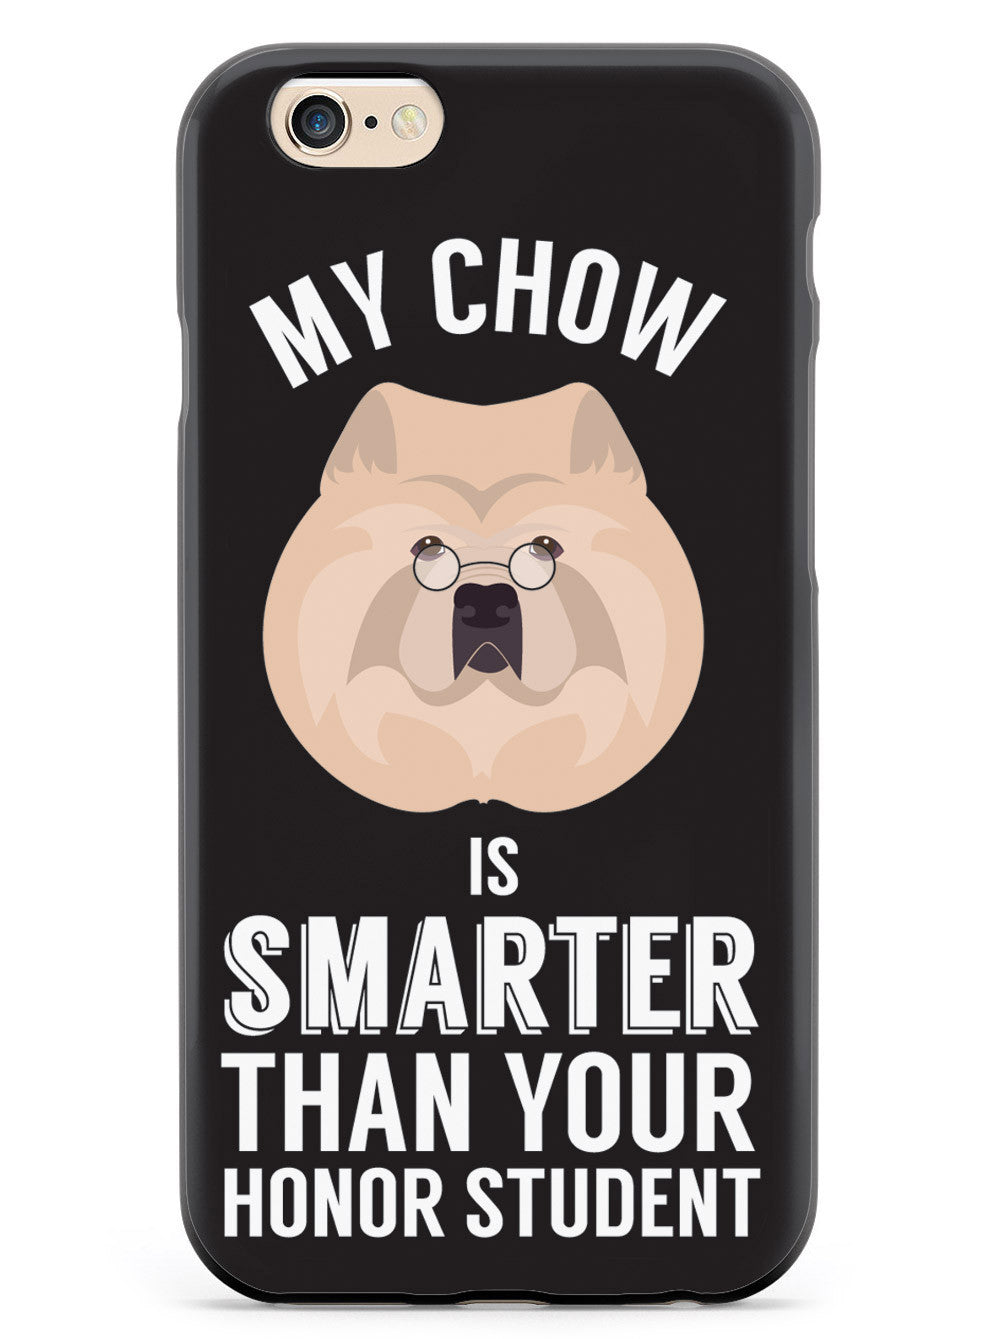 Smarter Than Your Honor Student - Chow Case